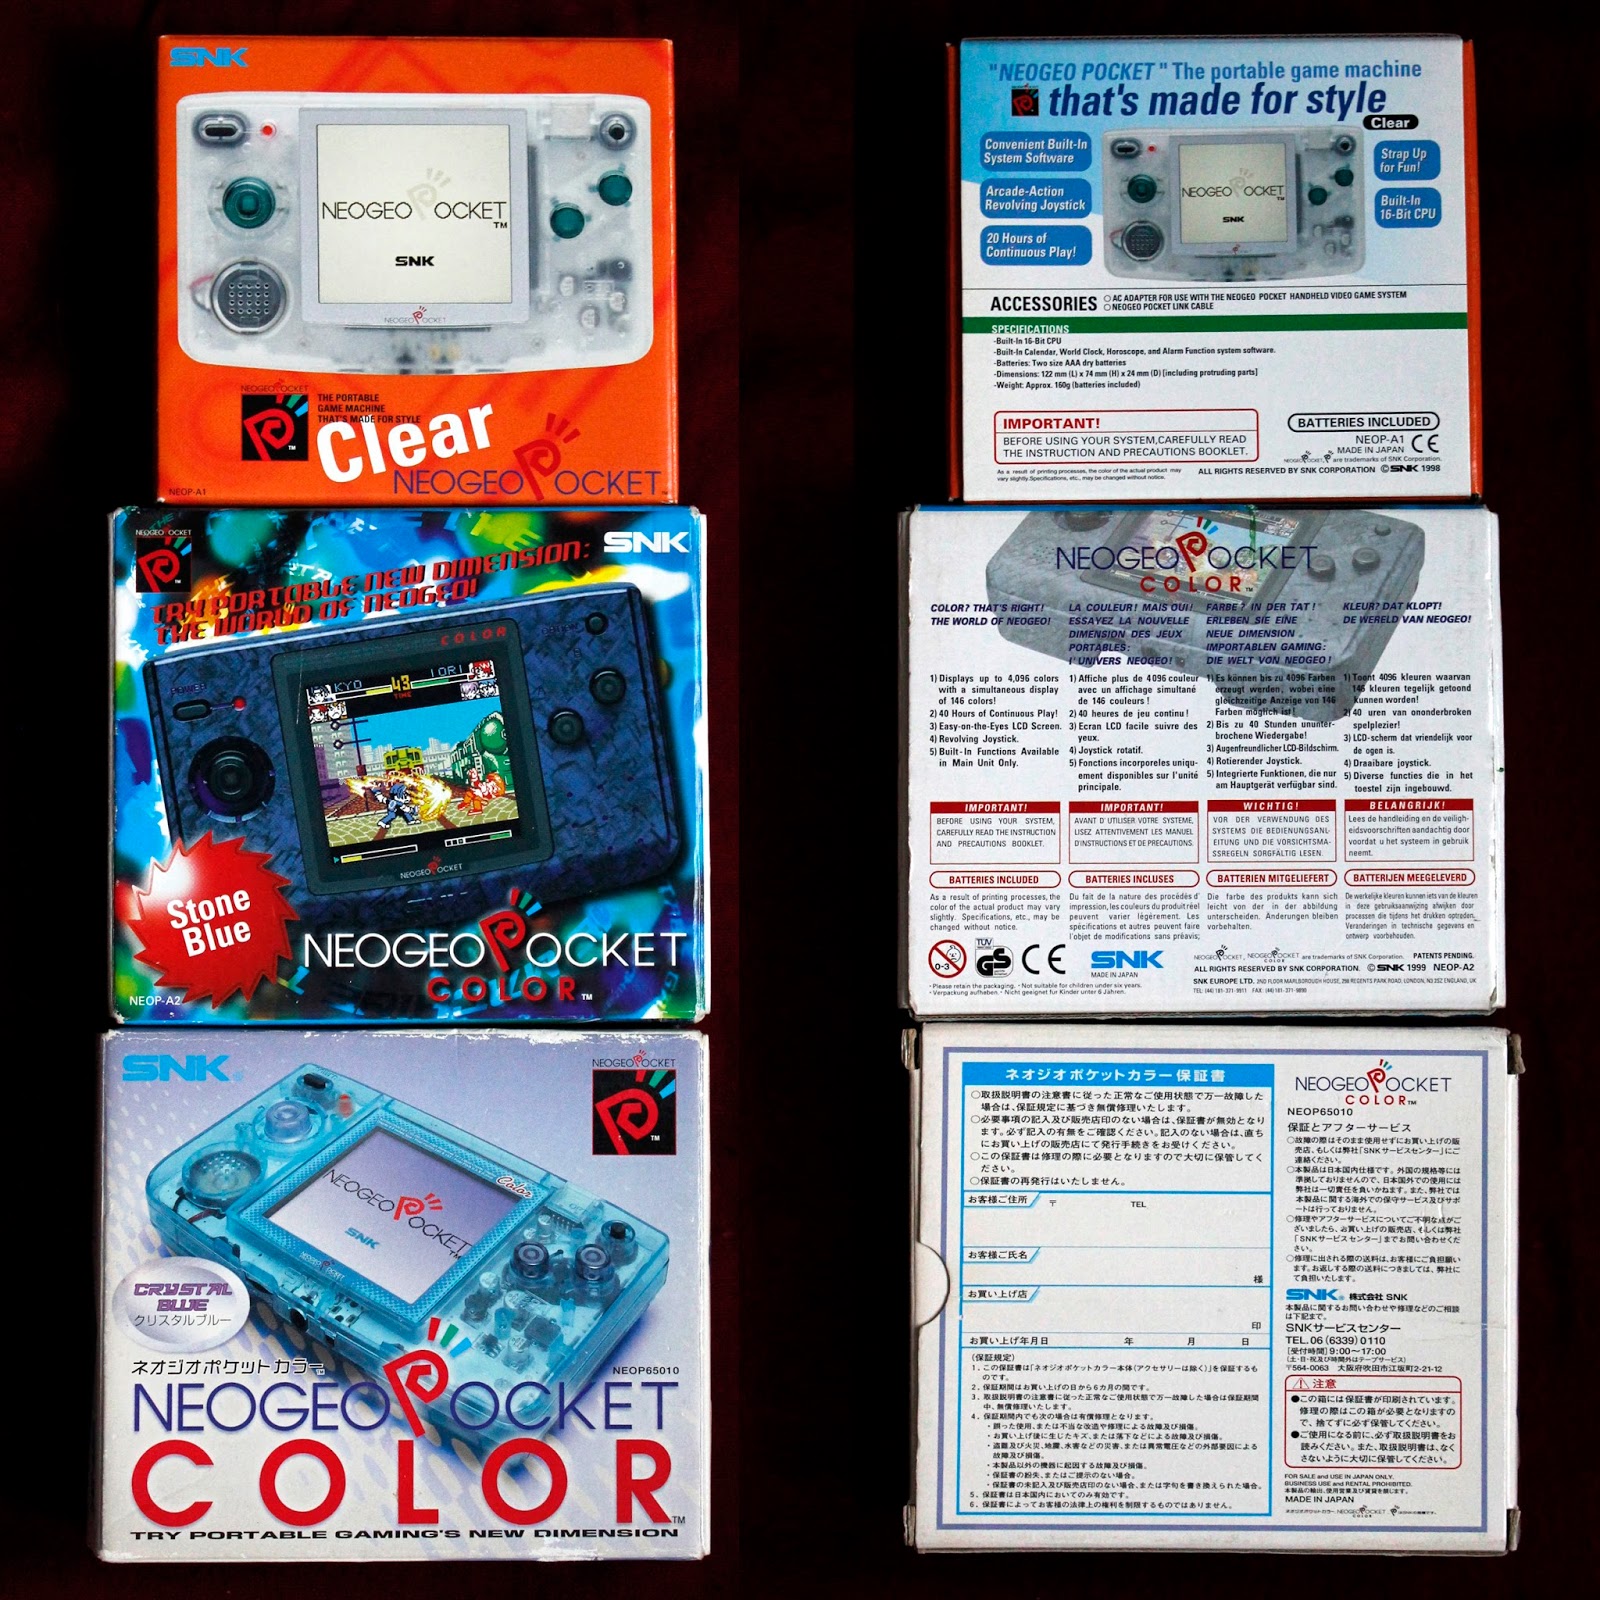 Love Without Anger: Neo Geo Pocket Comparison: B&W / Color / 'New